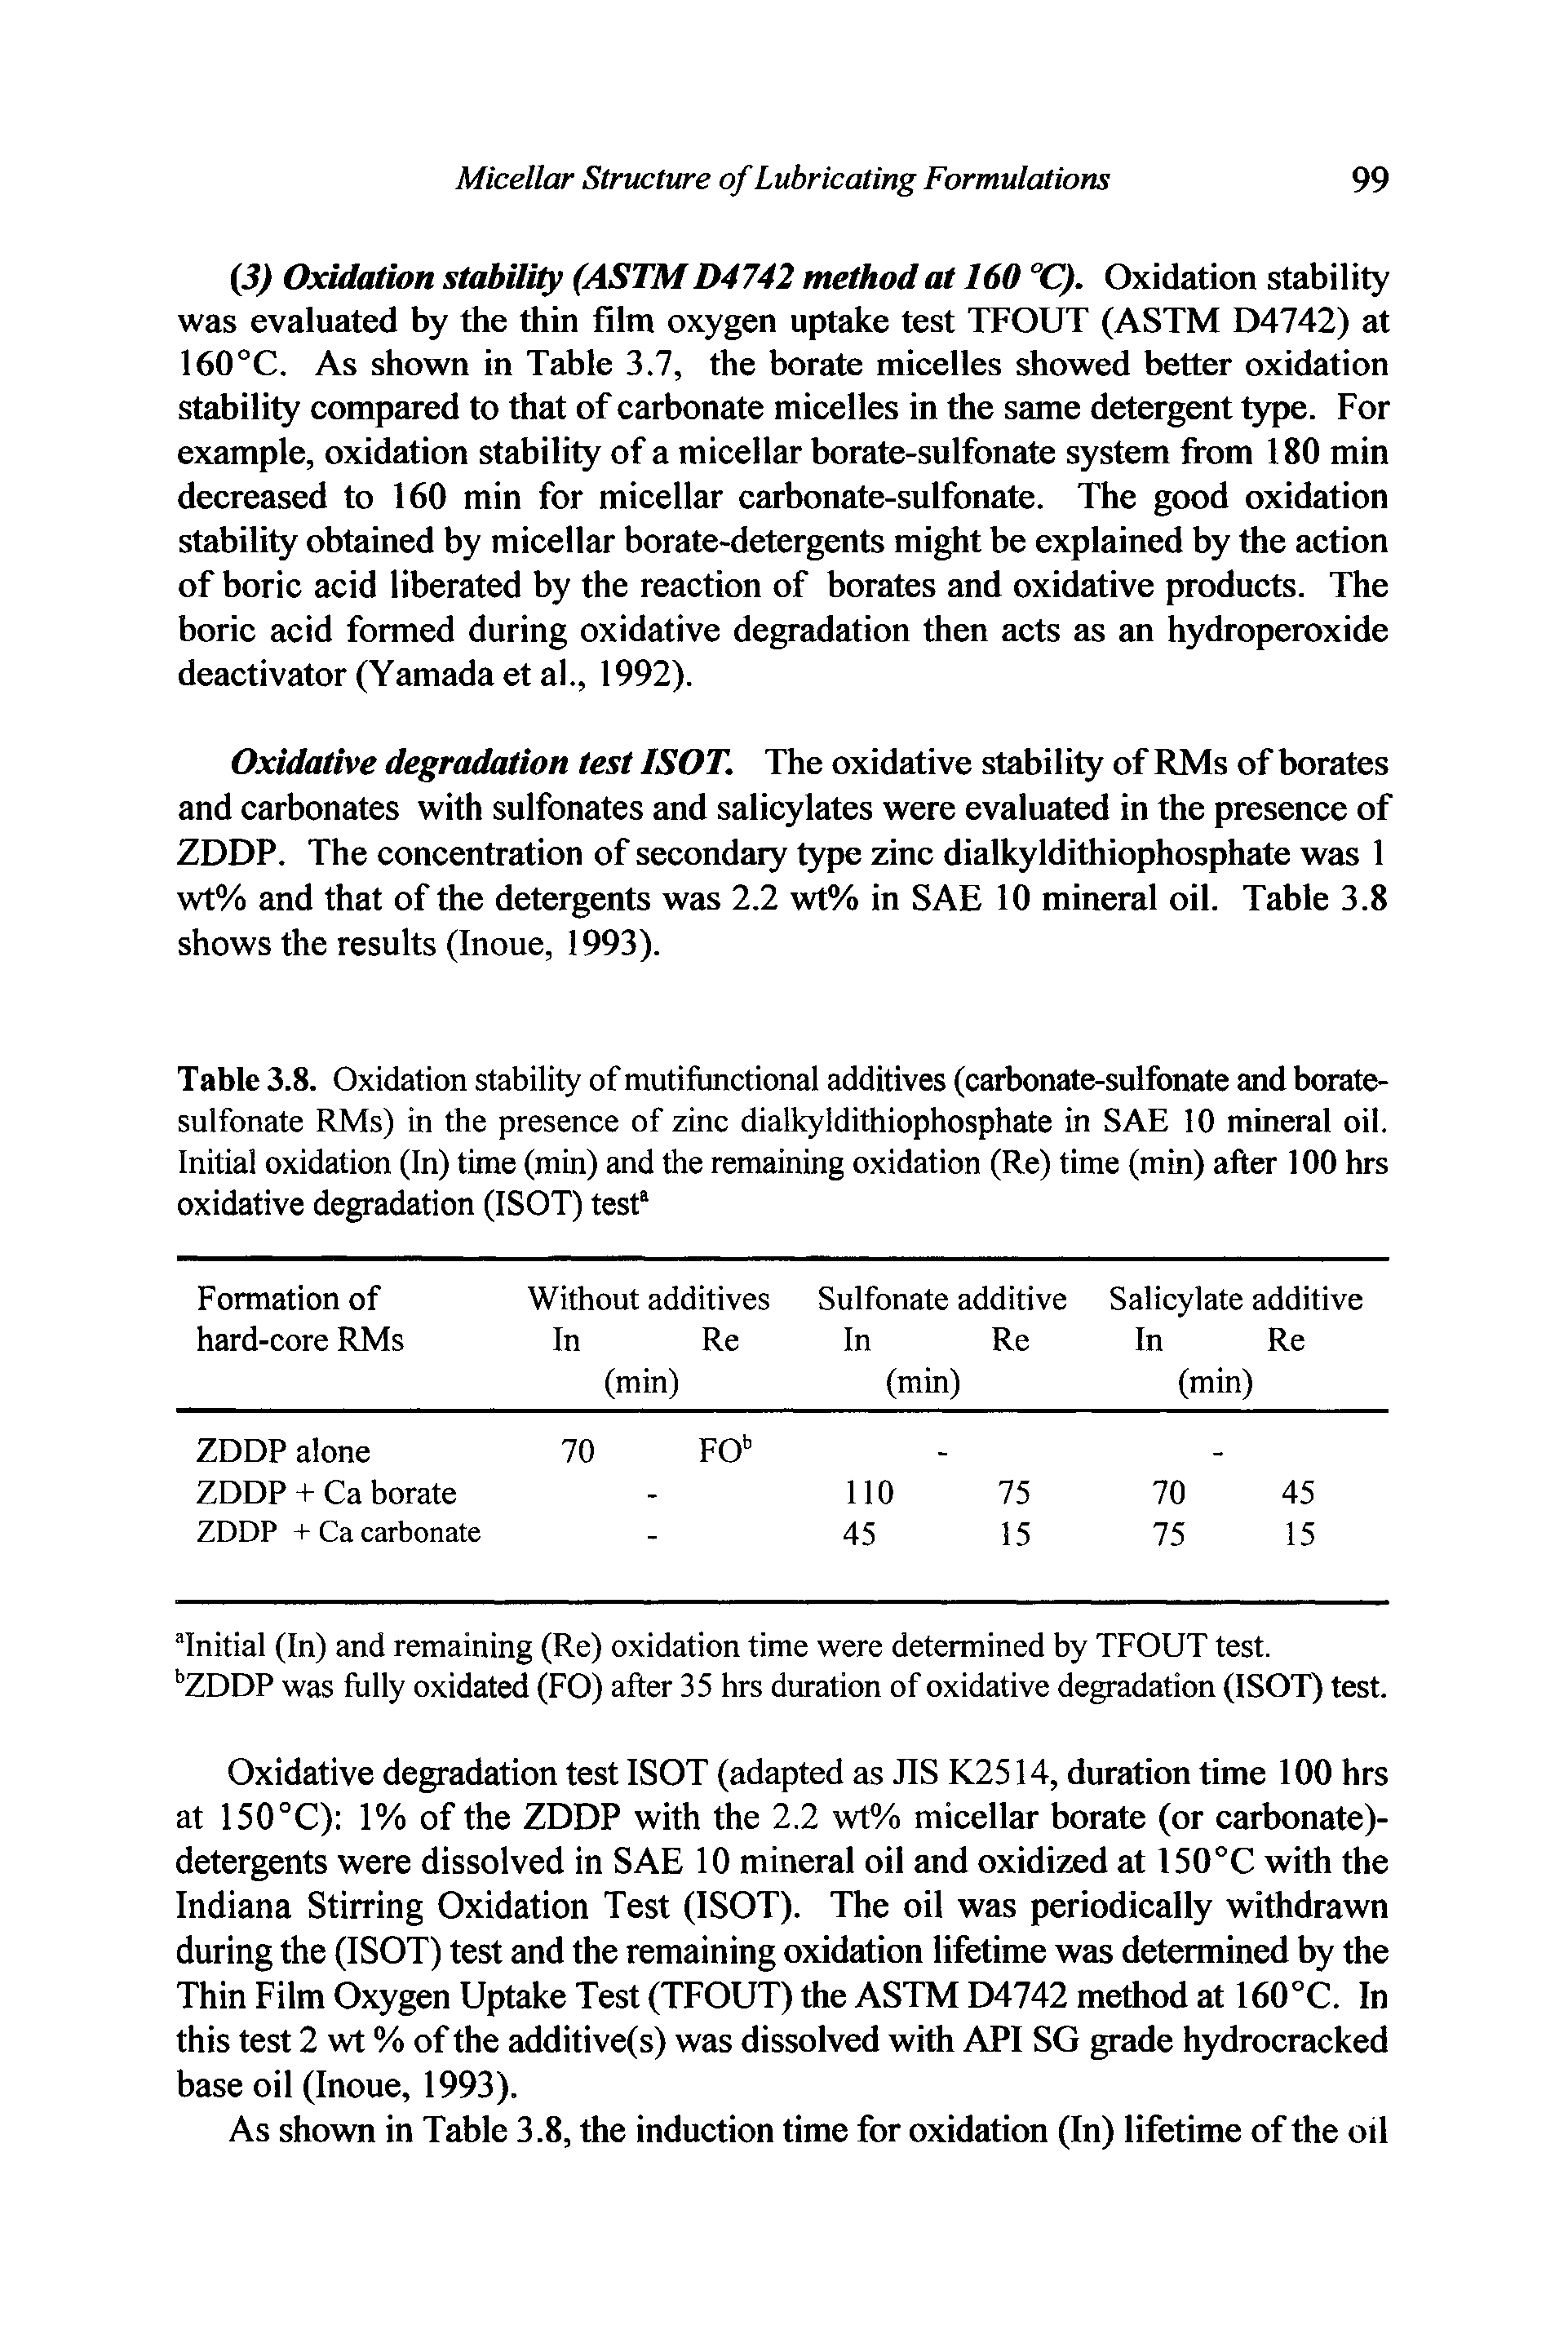 Table 3.8. Oxidation stability of mutifunctional additives (carbonate-sulfonate and borate-sulfonate RMs) in the presence of zinc dialkyldithiophosphate in SAE 10 mineral oil. Initial oxidation (In) time (min) and the remaining oxidation (Re) time (min) after 100 hrs oxidative degradation (ISOT) test8...